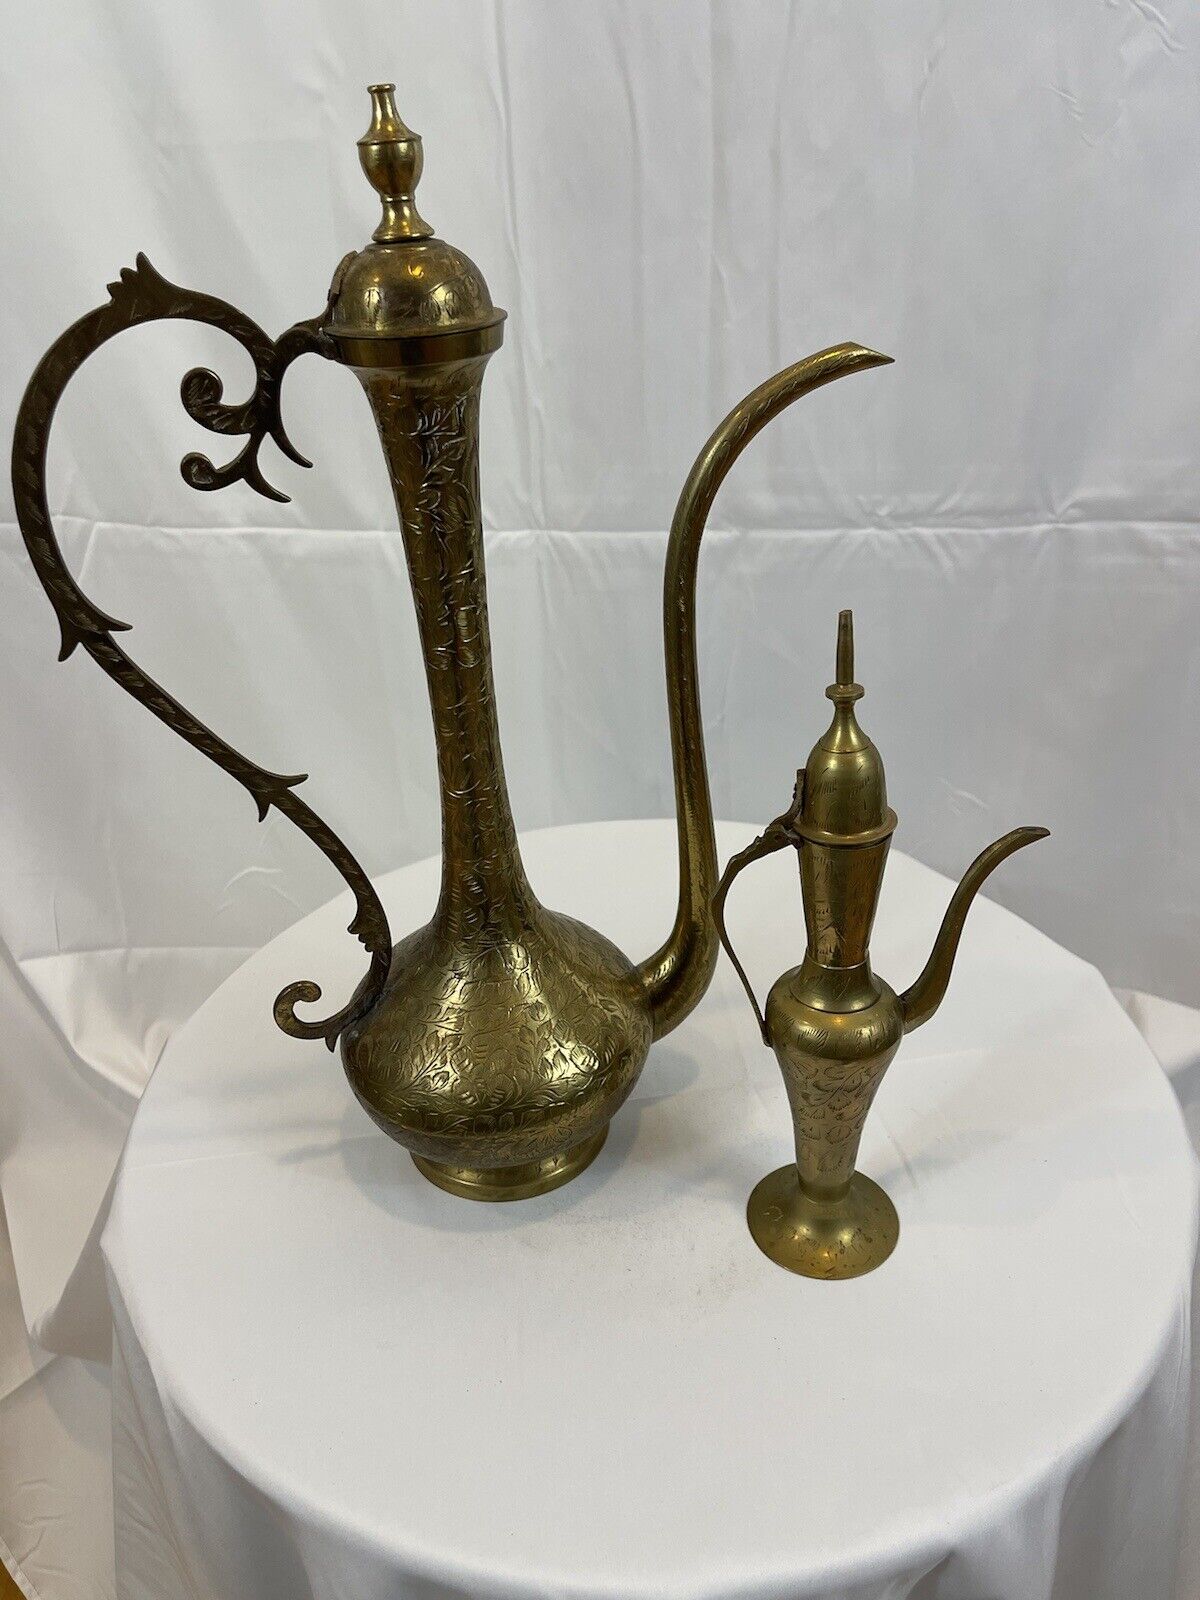 Vintage Set Of 2 Engraved Etched Brass Surahi Dallah Tea Coffee Pots India